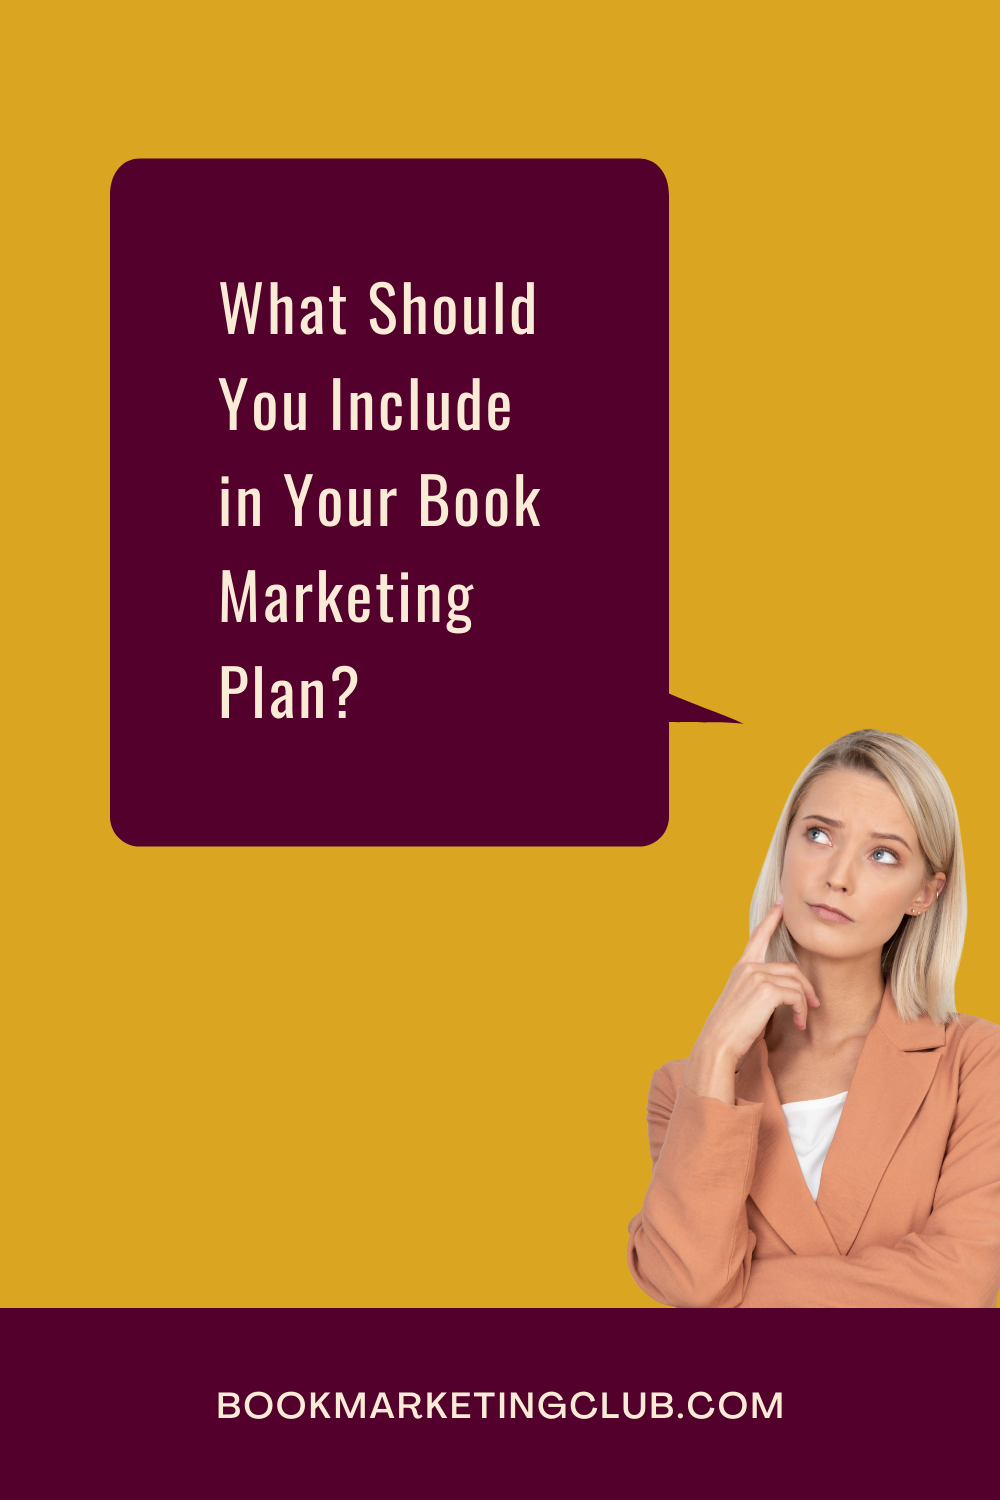 What Should You Include in Your Book Marketing Plan?